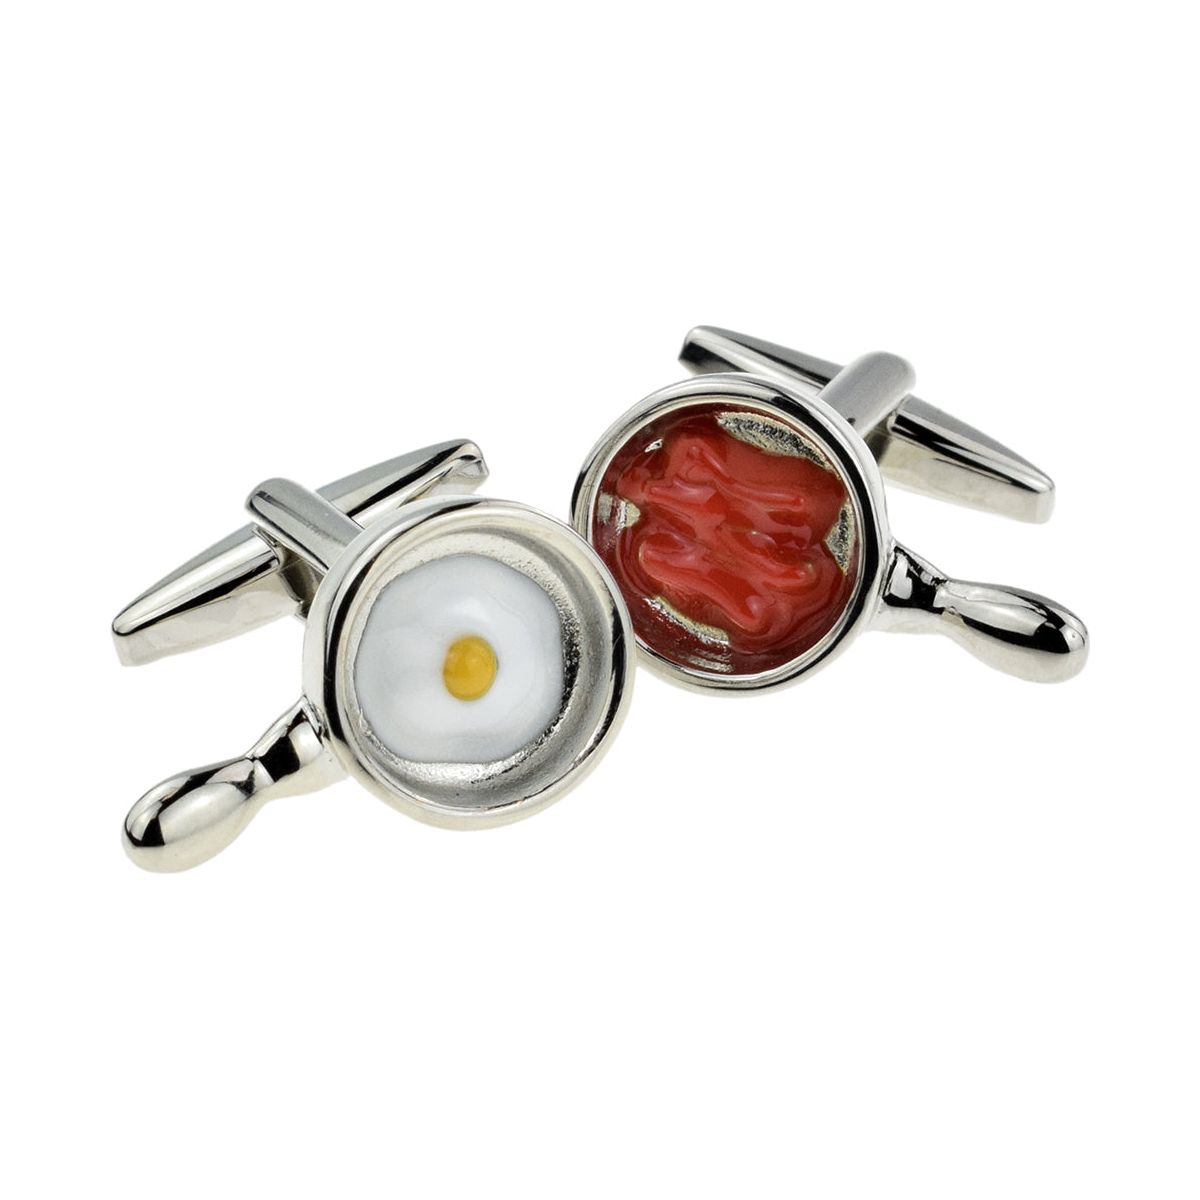 Bacon & Eggs in the Pan Breakfast Fry Up Cufflinks - Ashton and Finch